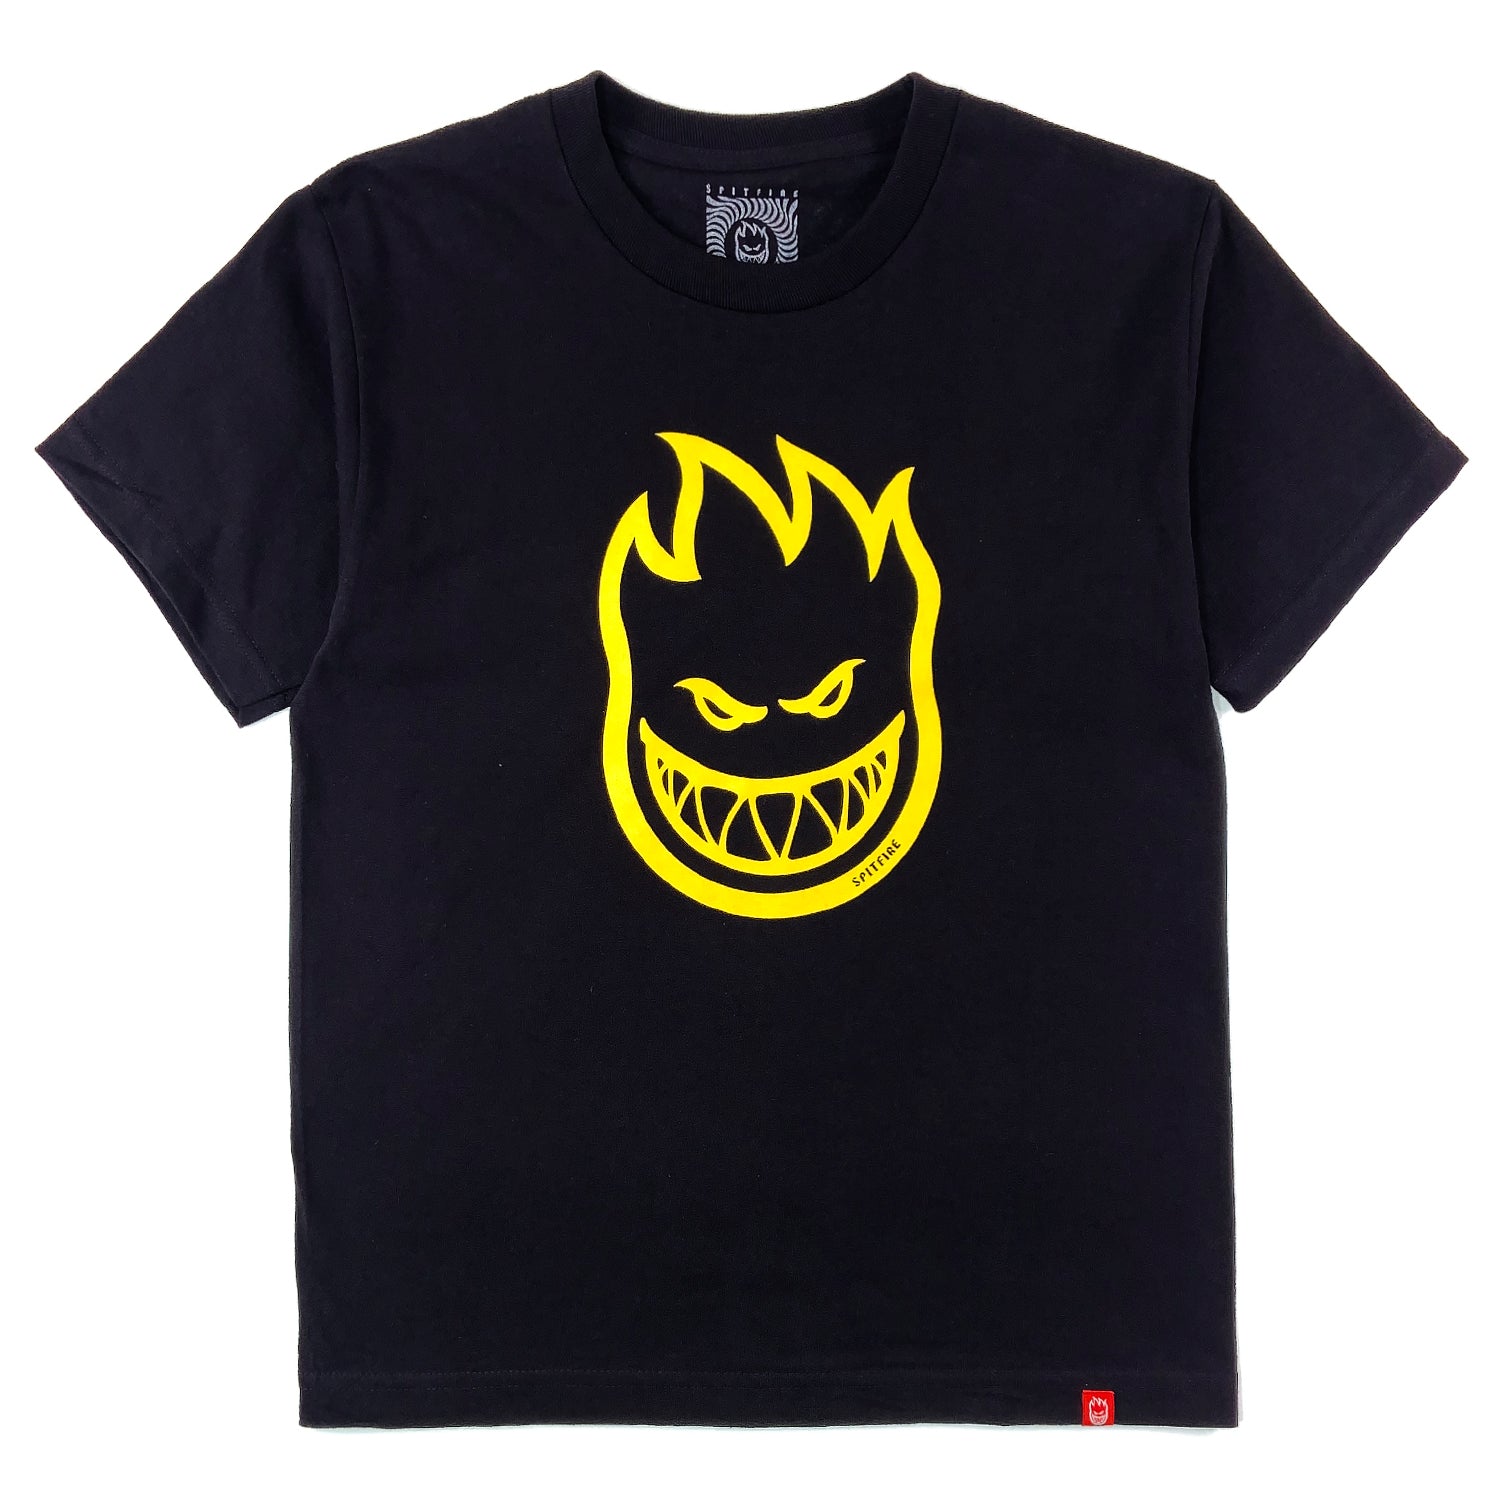 Spitfire - Bighead Fade - Youth T-Shirt - Black - Prime Delux Store